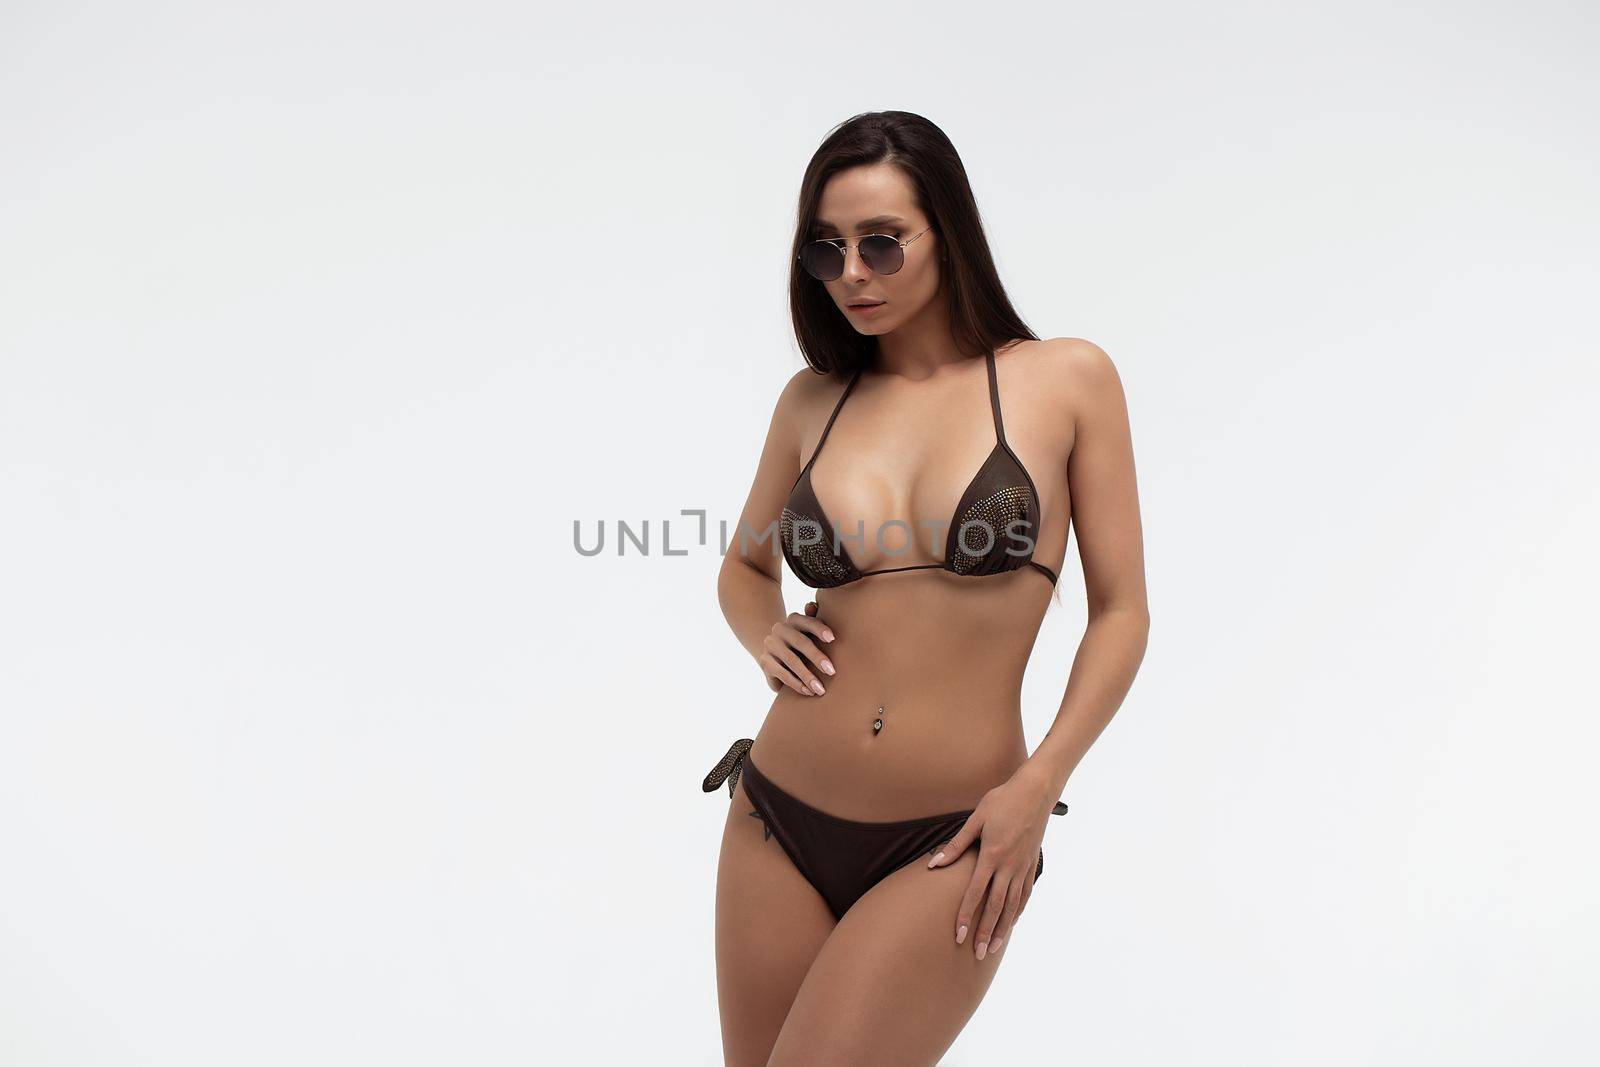 Attractive long haired young brunette model in sexy black bikini and trendy sunglasses touching hair while standing against white background